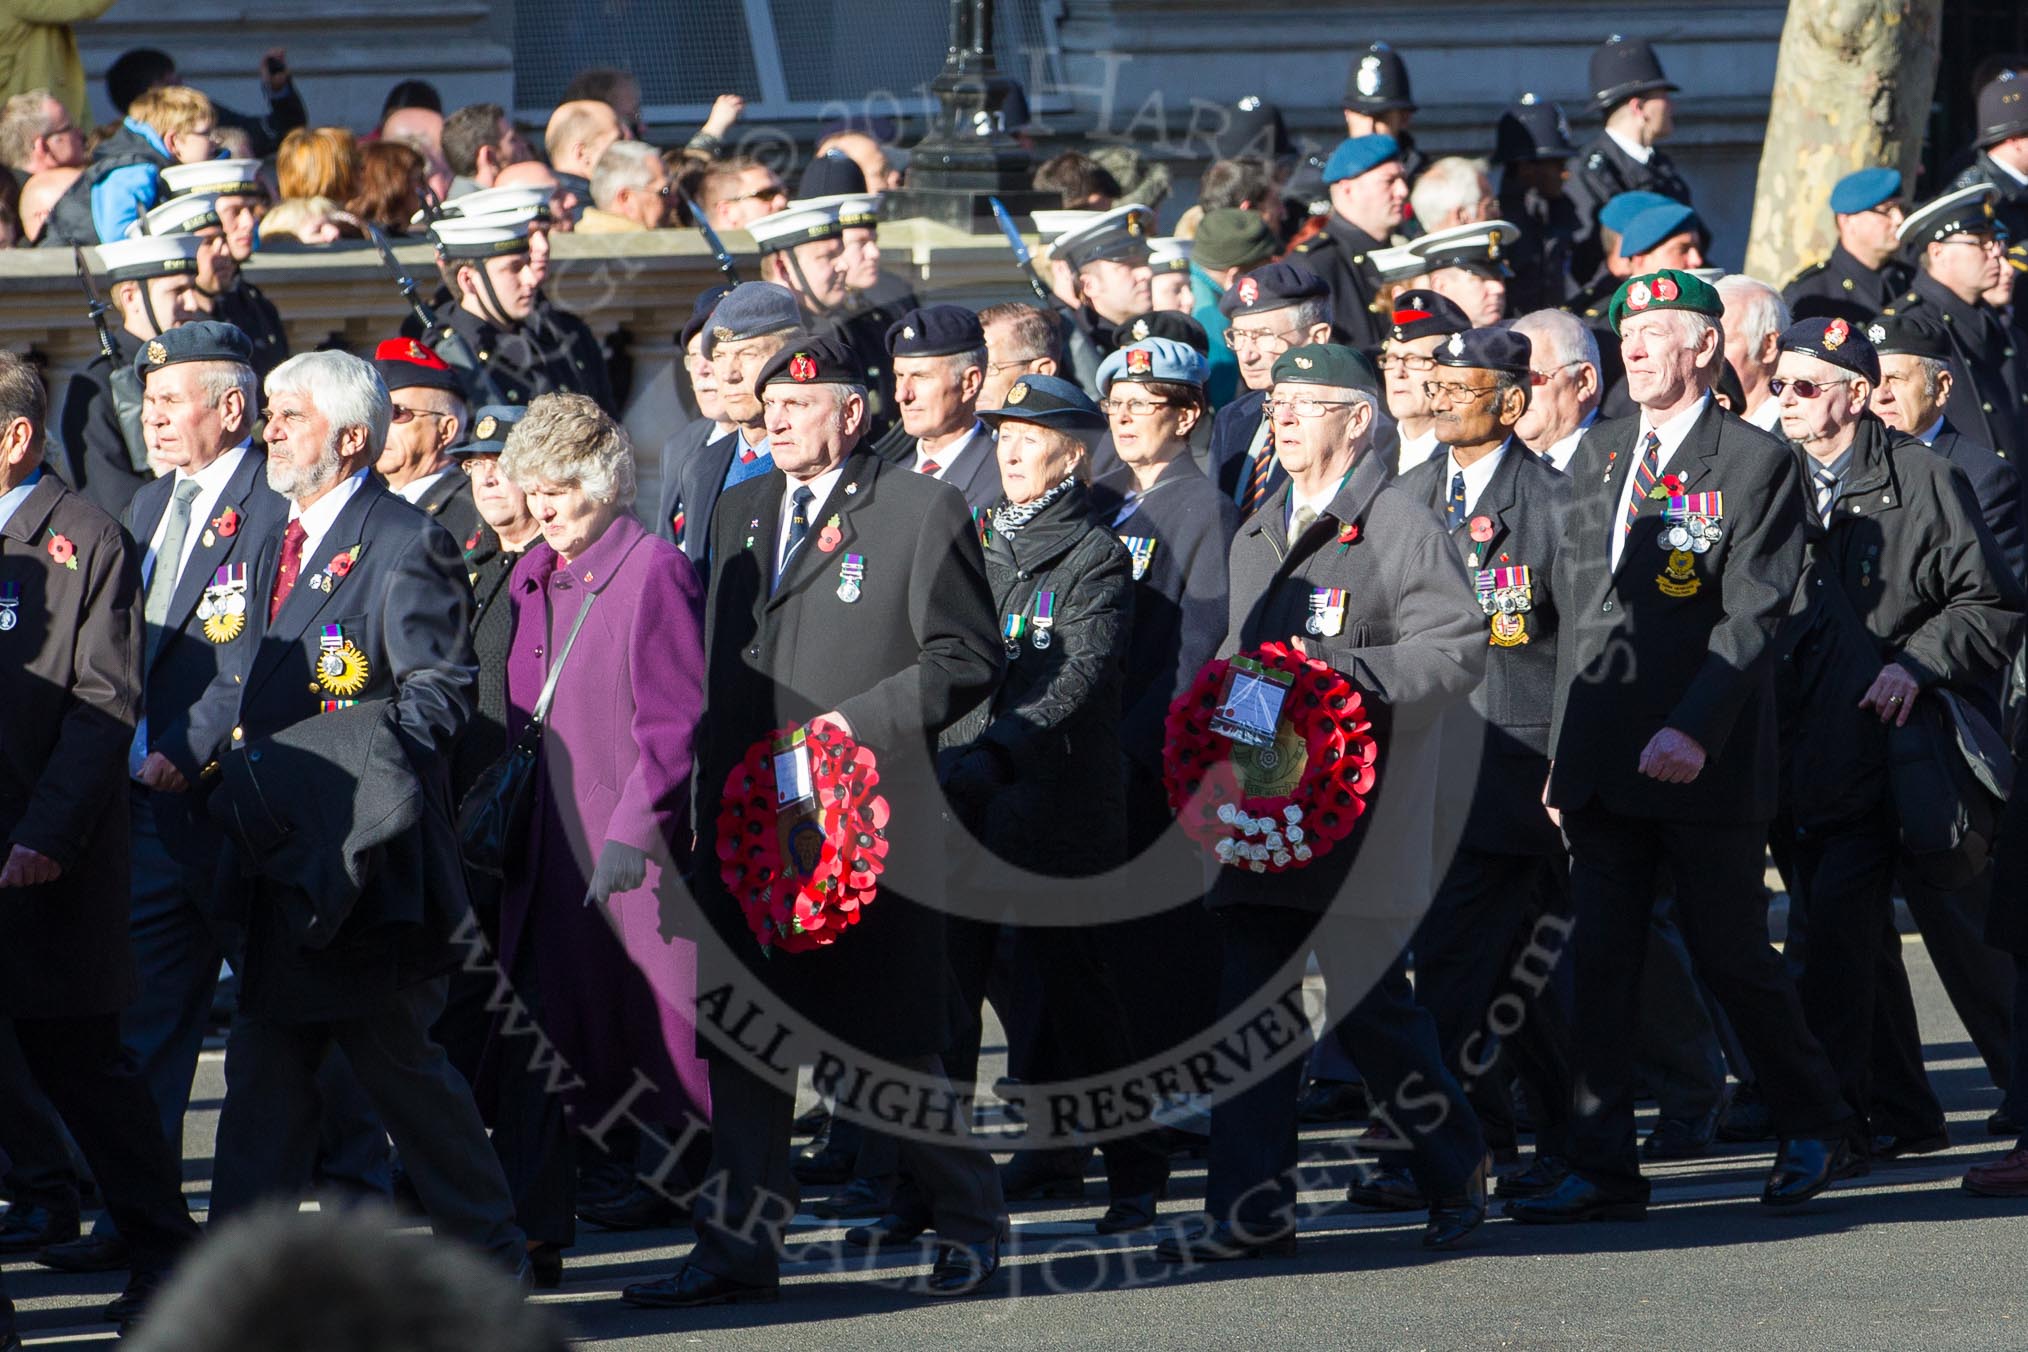 Remembrance Sunday 2012 Cenotaph March Past: Group F2 - Aden Veterans Association..
Whitehall, Cenotaph,
London SW1,

United Kingdom,
on 11 November 2012 at 11:45, image #392